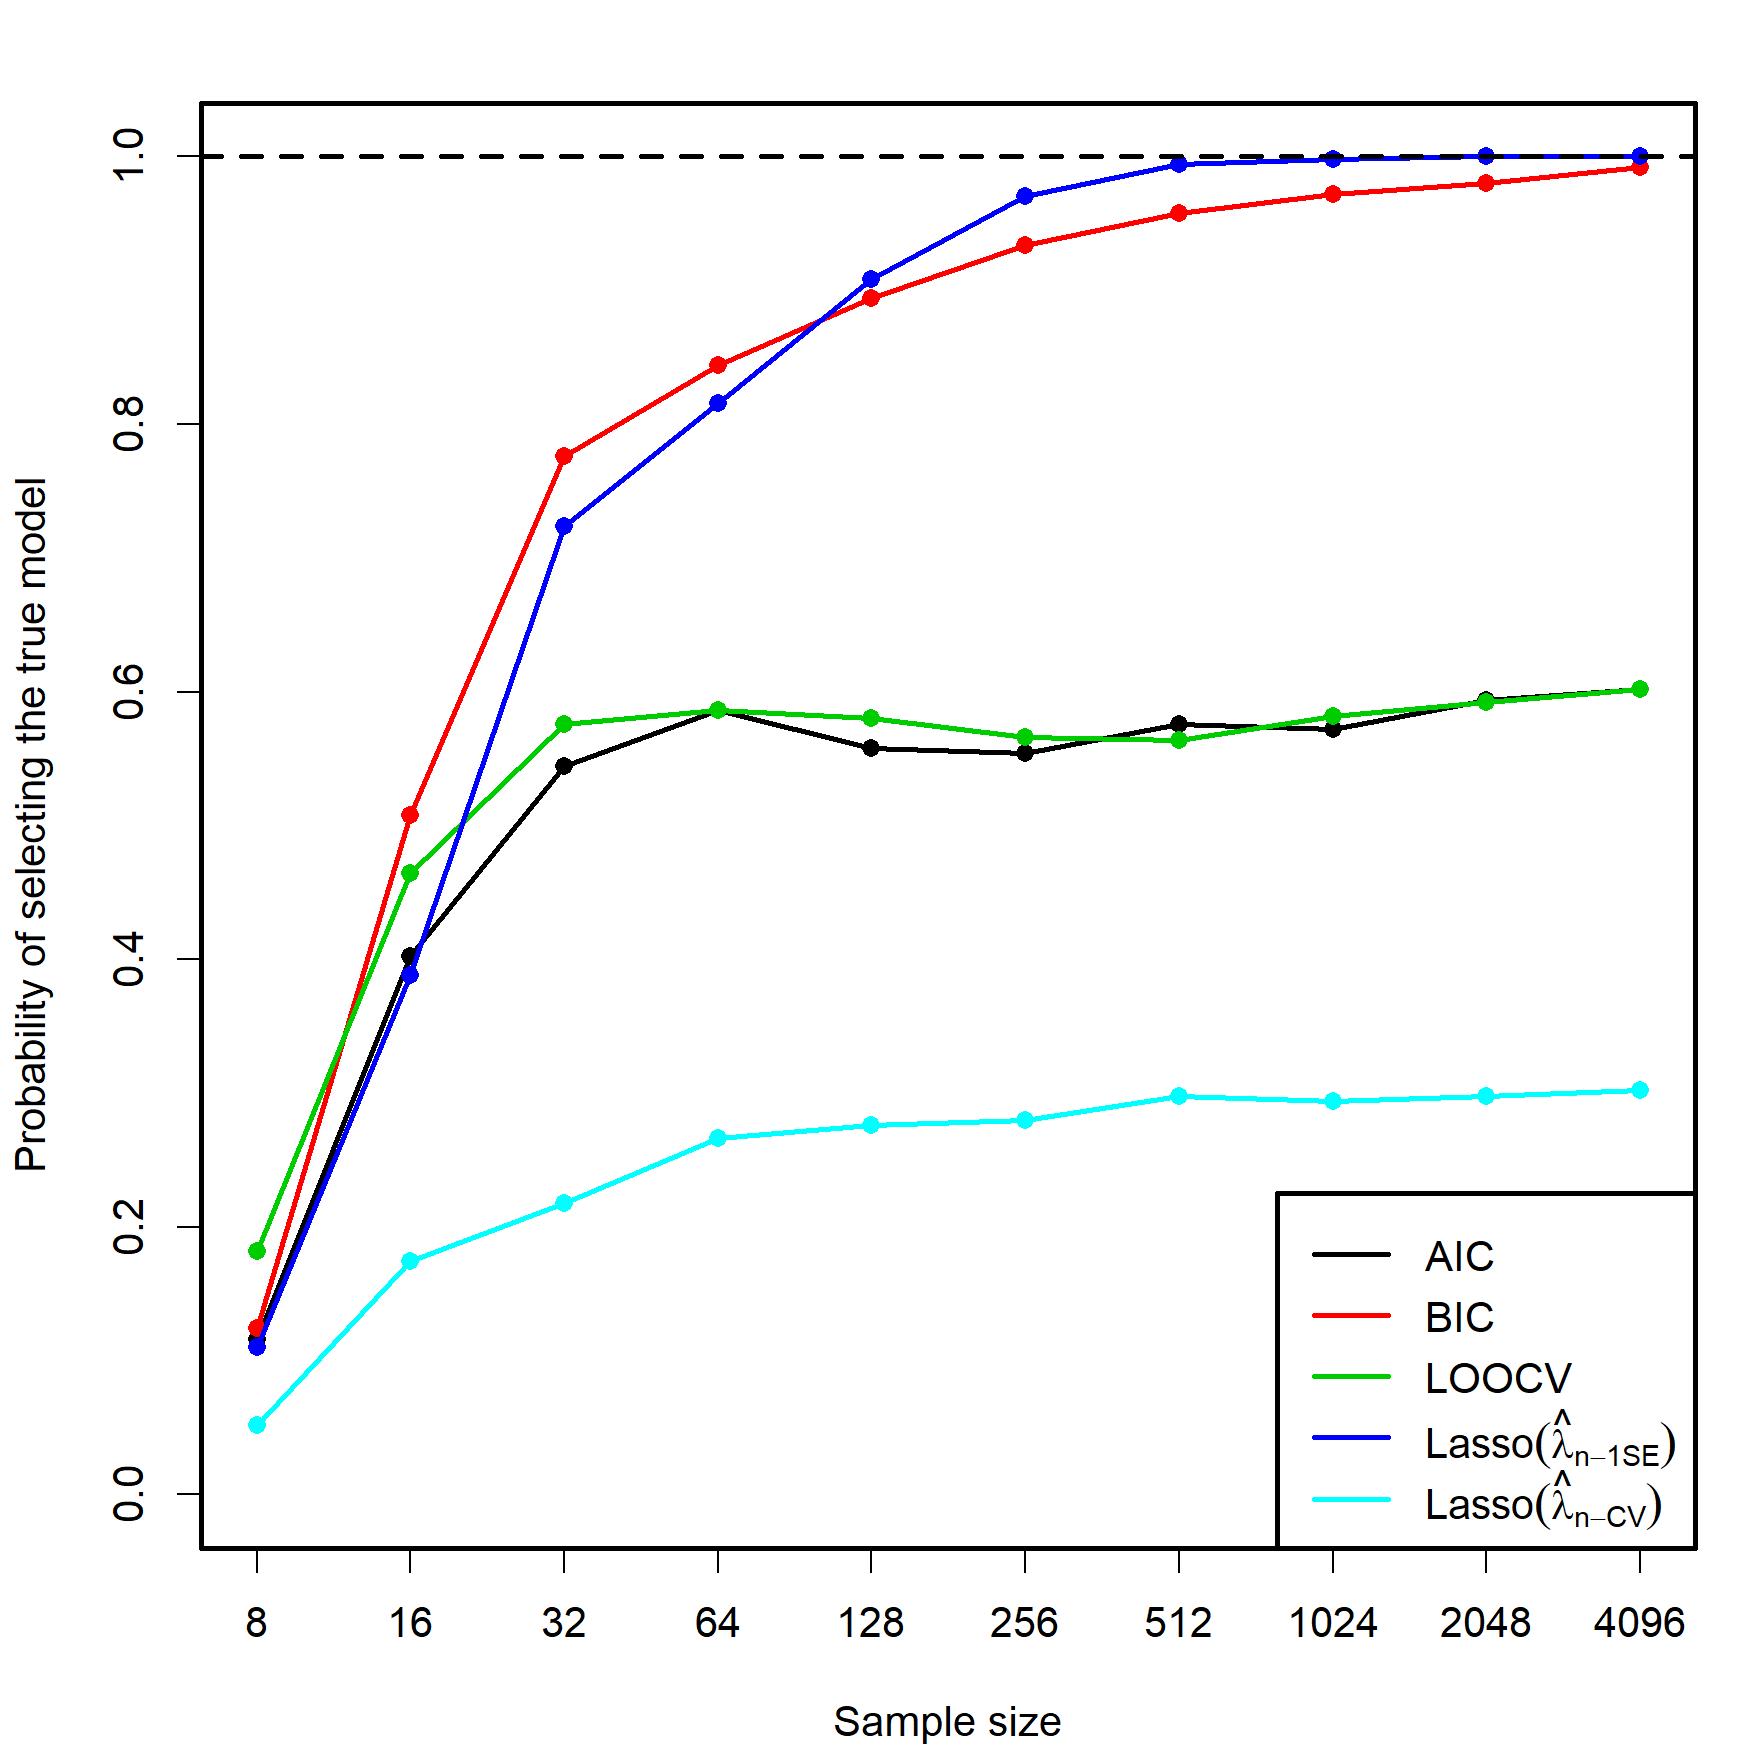 Estimation of the probability of selecting the correct model by lasso selection based on \(\hat{\lambda}_{n\text{-CV}}\) and \(\hat\lambda_{n\text{-1SE}},\) and by minimizing the AIC, BIC, and LOOCV criteria in an exhaustive search (see Figure 3.5). There are \(p=5\) independent predictors and the correct model contained two predictors. The probability was estimated with \(M=500\) Monte Carlo runs.